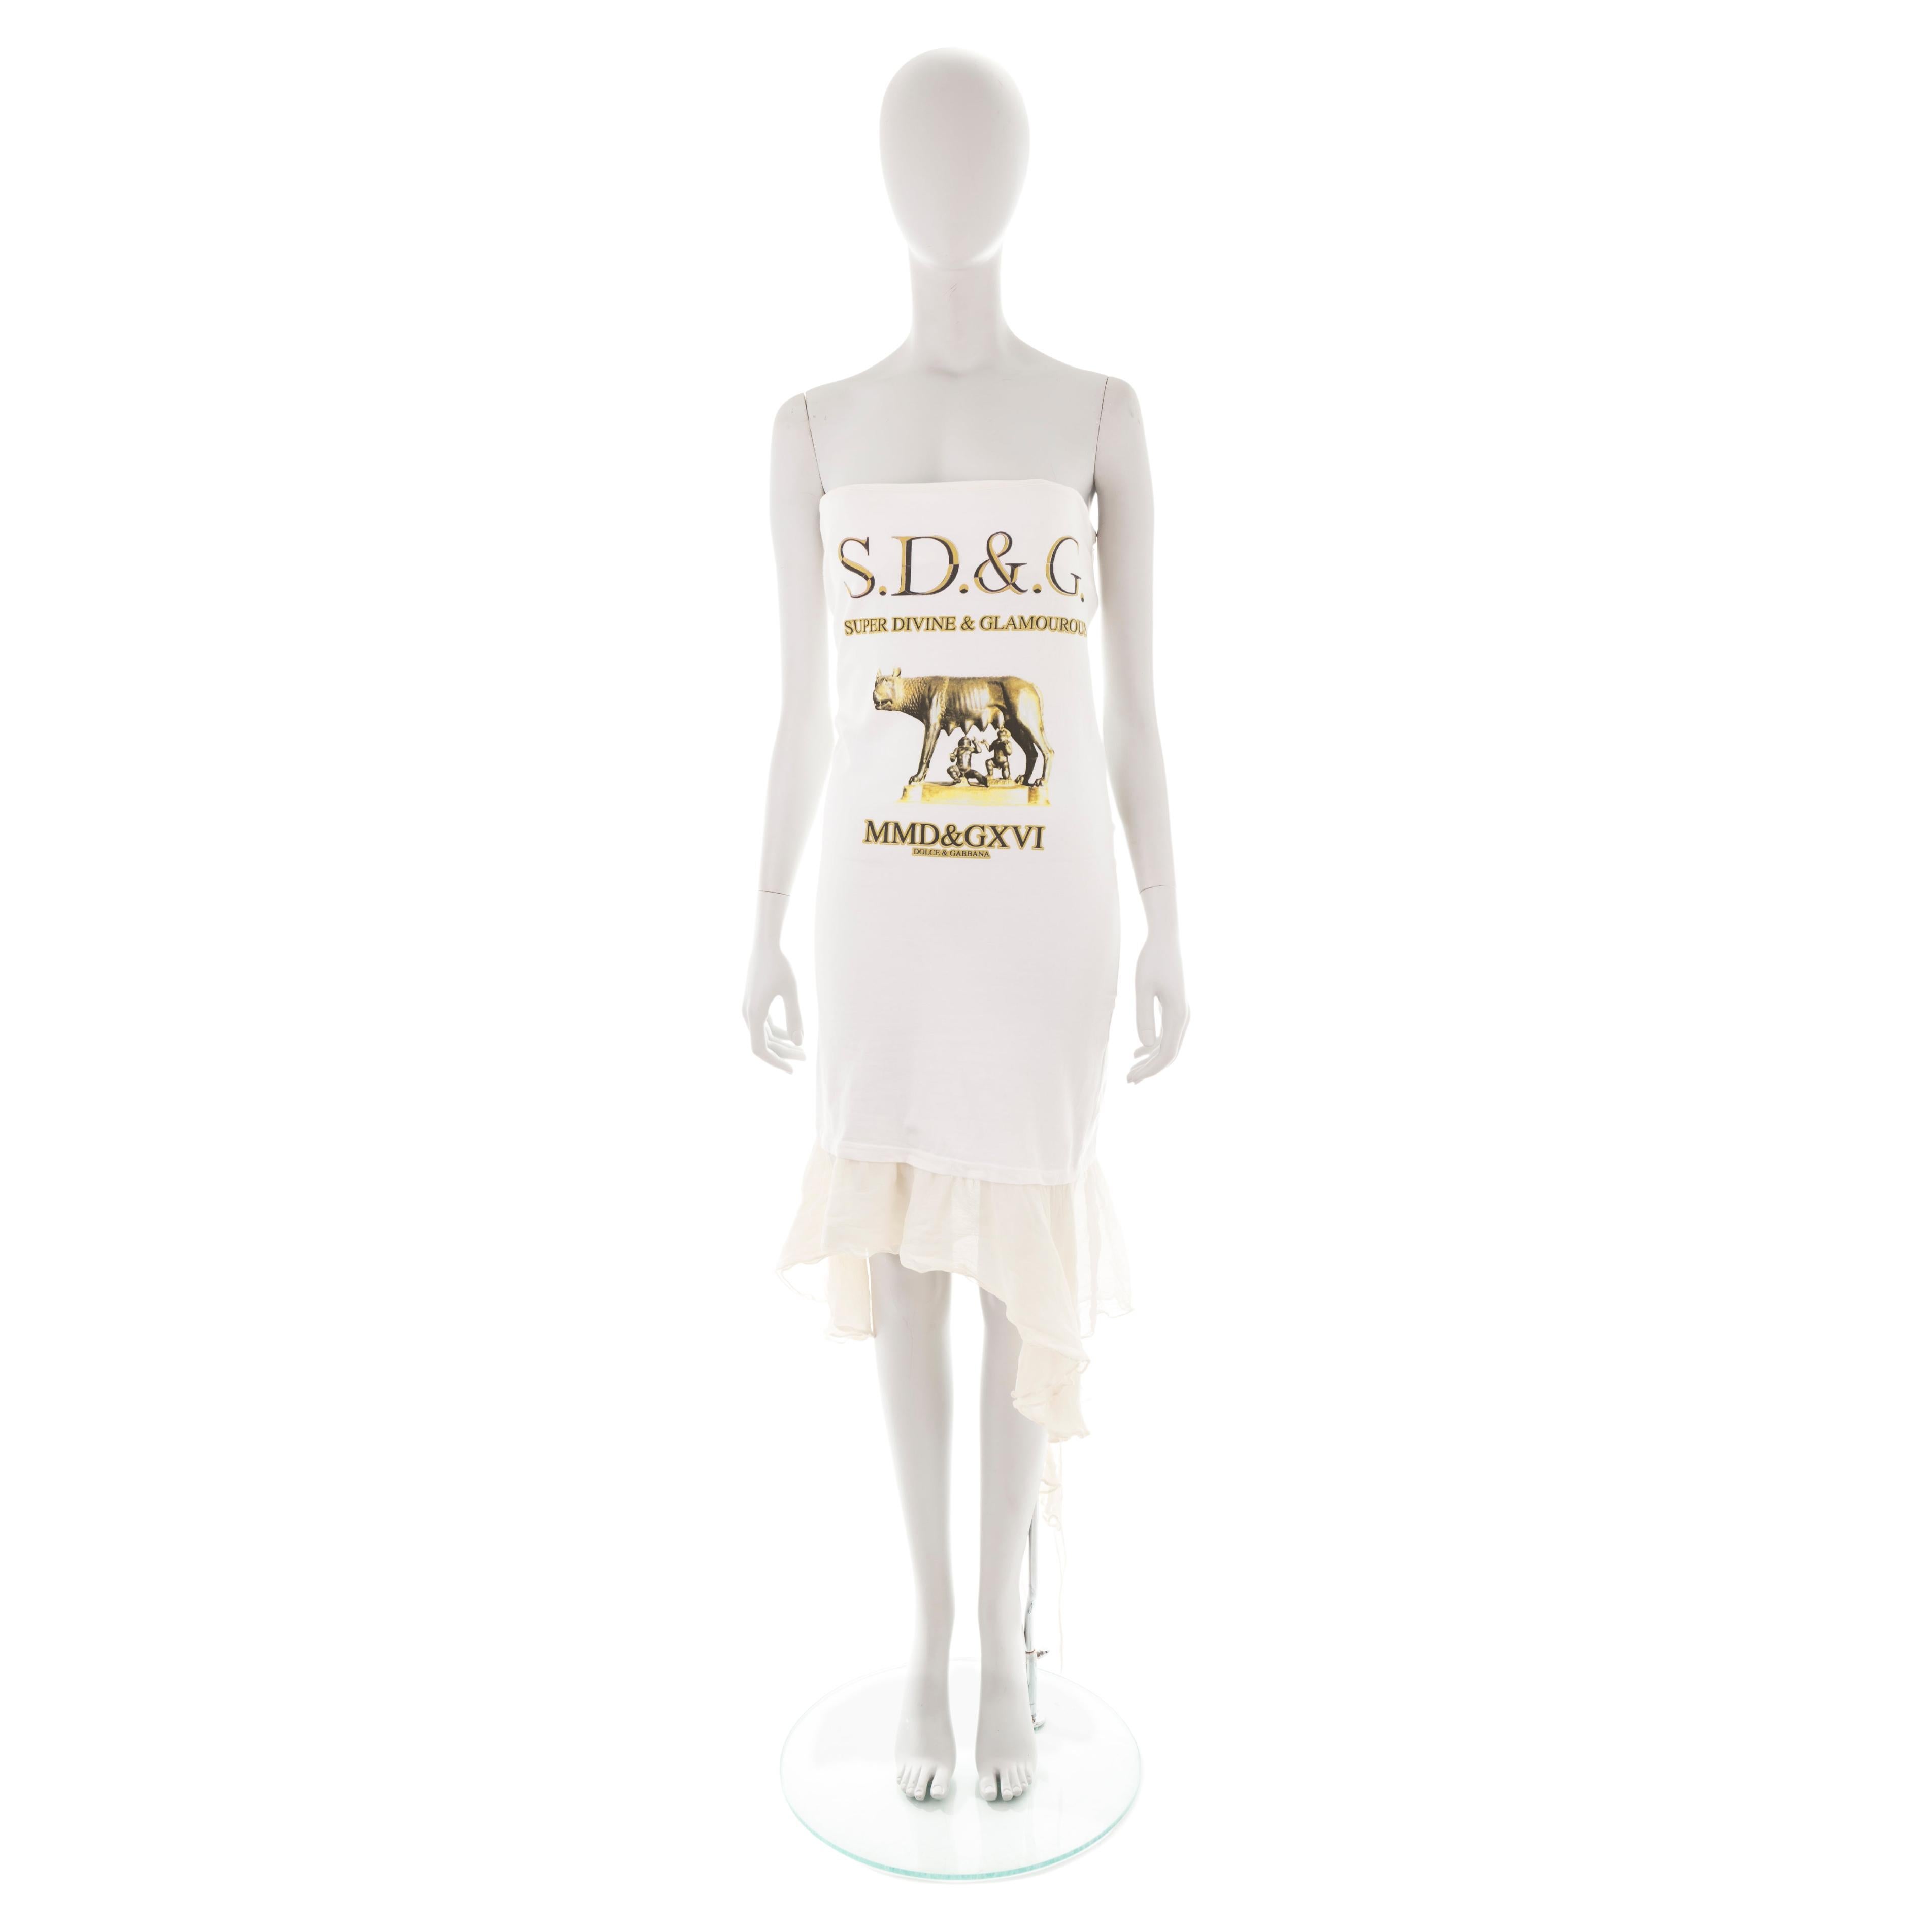 - D&G by Dolce & Gabbana 
- Sold by Gold Palms Vintage
- Spring/Summer 2003
- White cotton midi tube dress
“Capitoline wolf” inspired print with logo slogan
- Silk chiffon jellyfish hem
- Size 44 
- Small stain on the back (not noticeable when